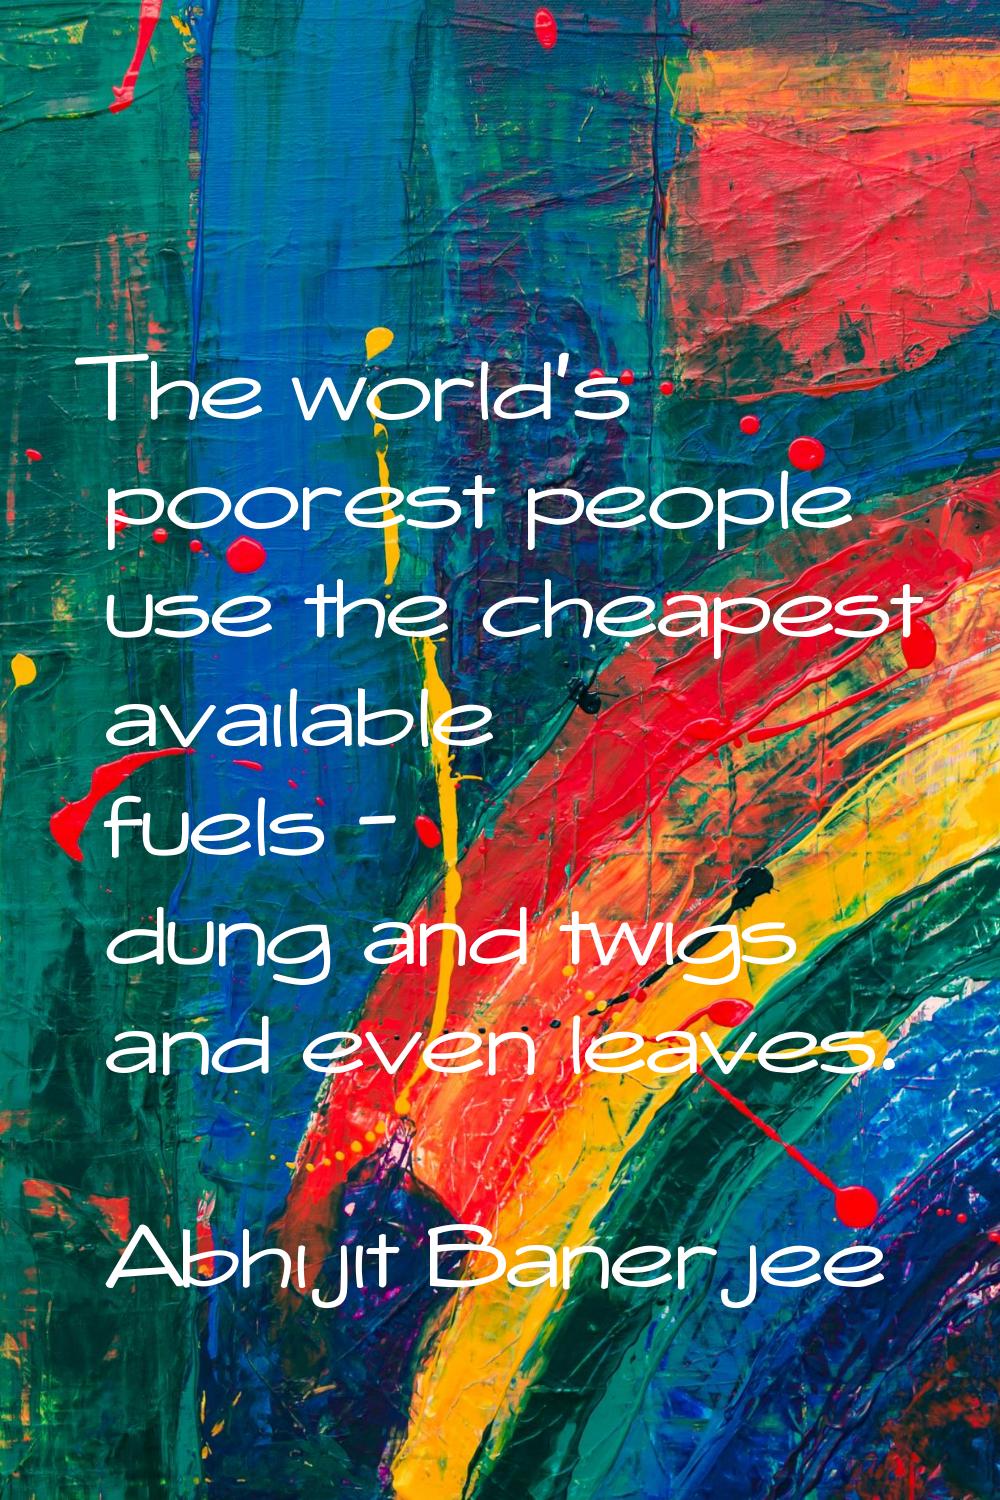 The world's poorest people use the cheapest available fuels - dung and twigs and even leaves.